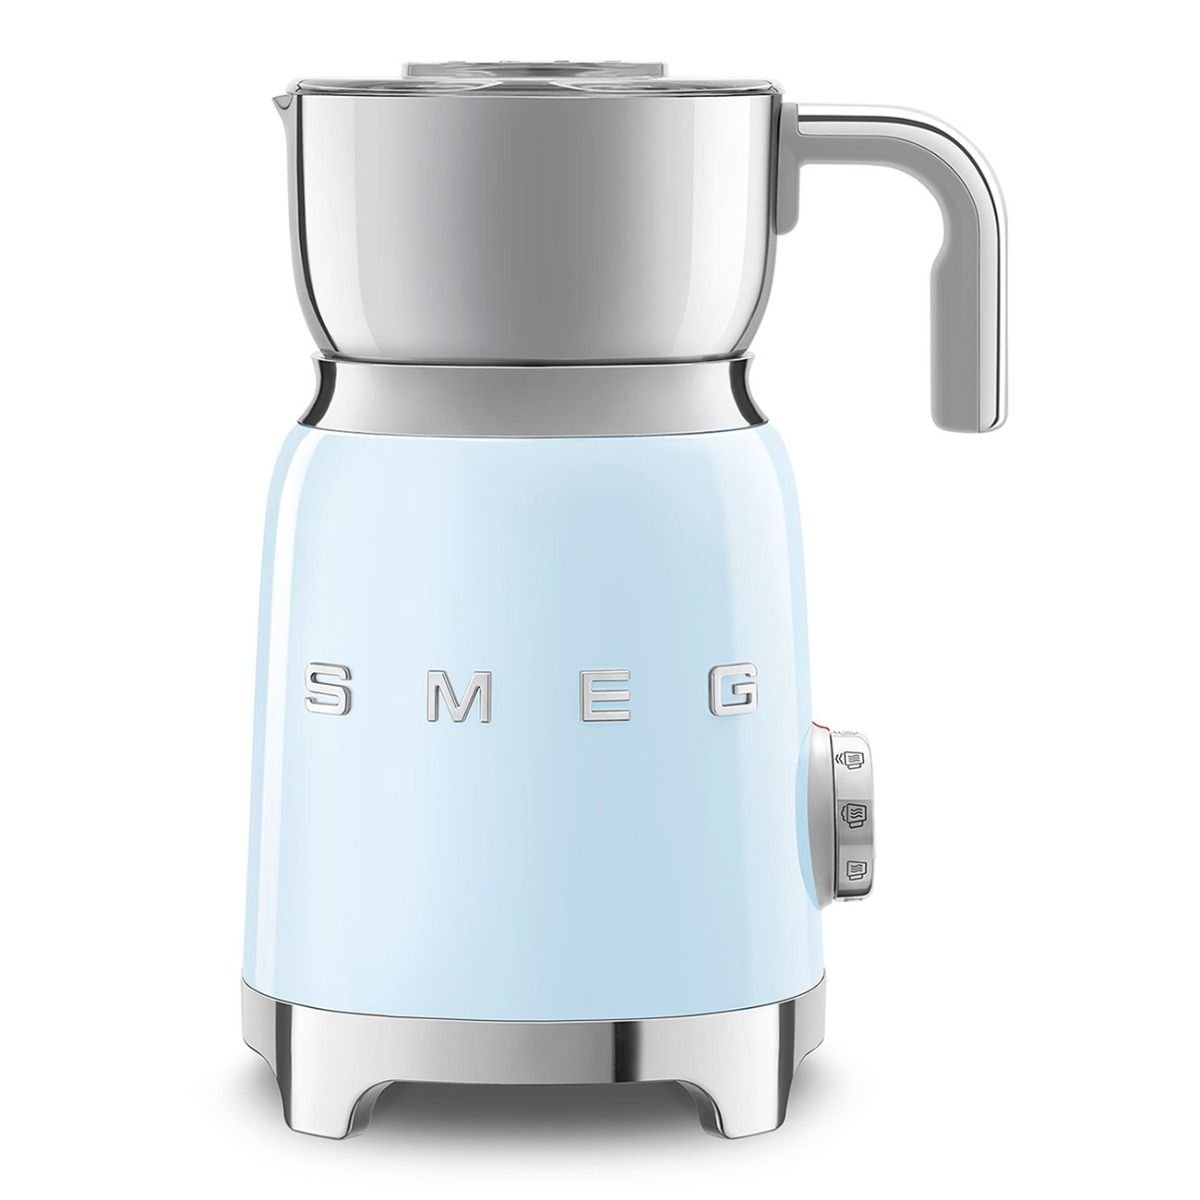 Perfect Bulletproof Coffee with the Vibe Blender stainless-steel